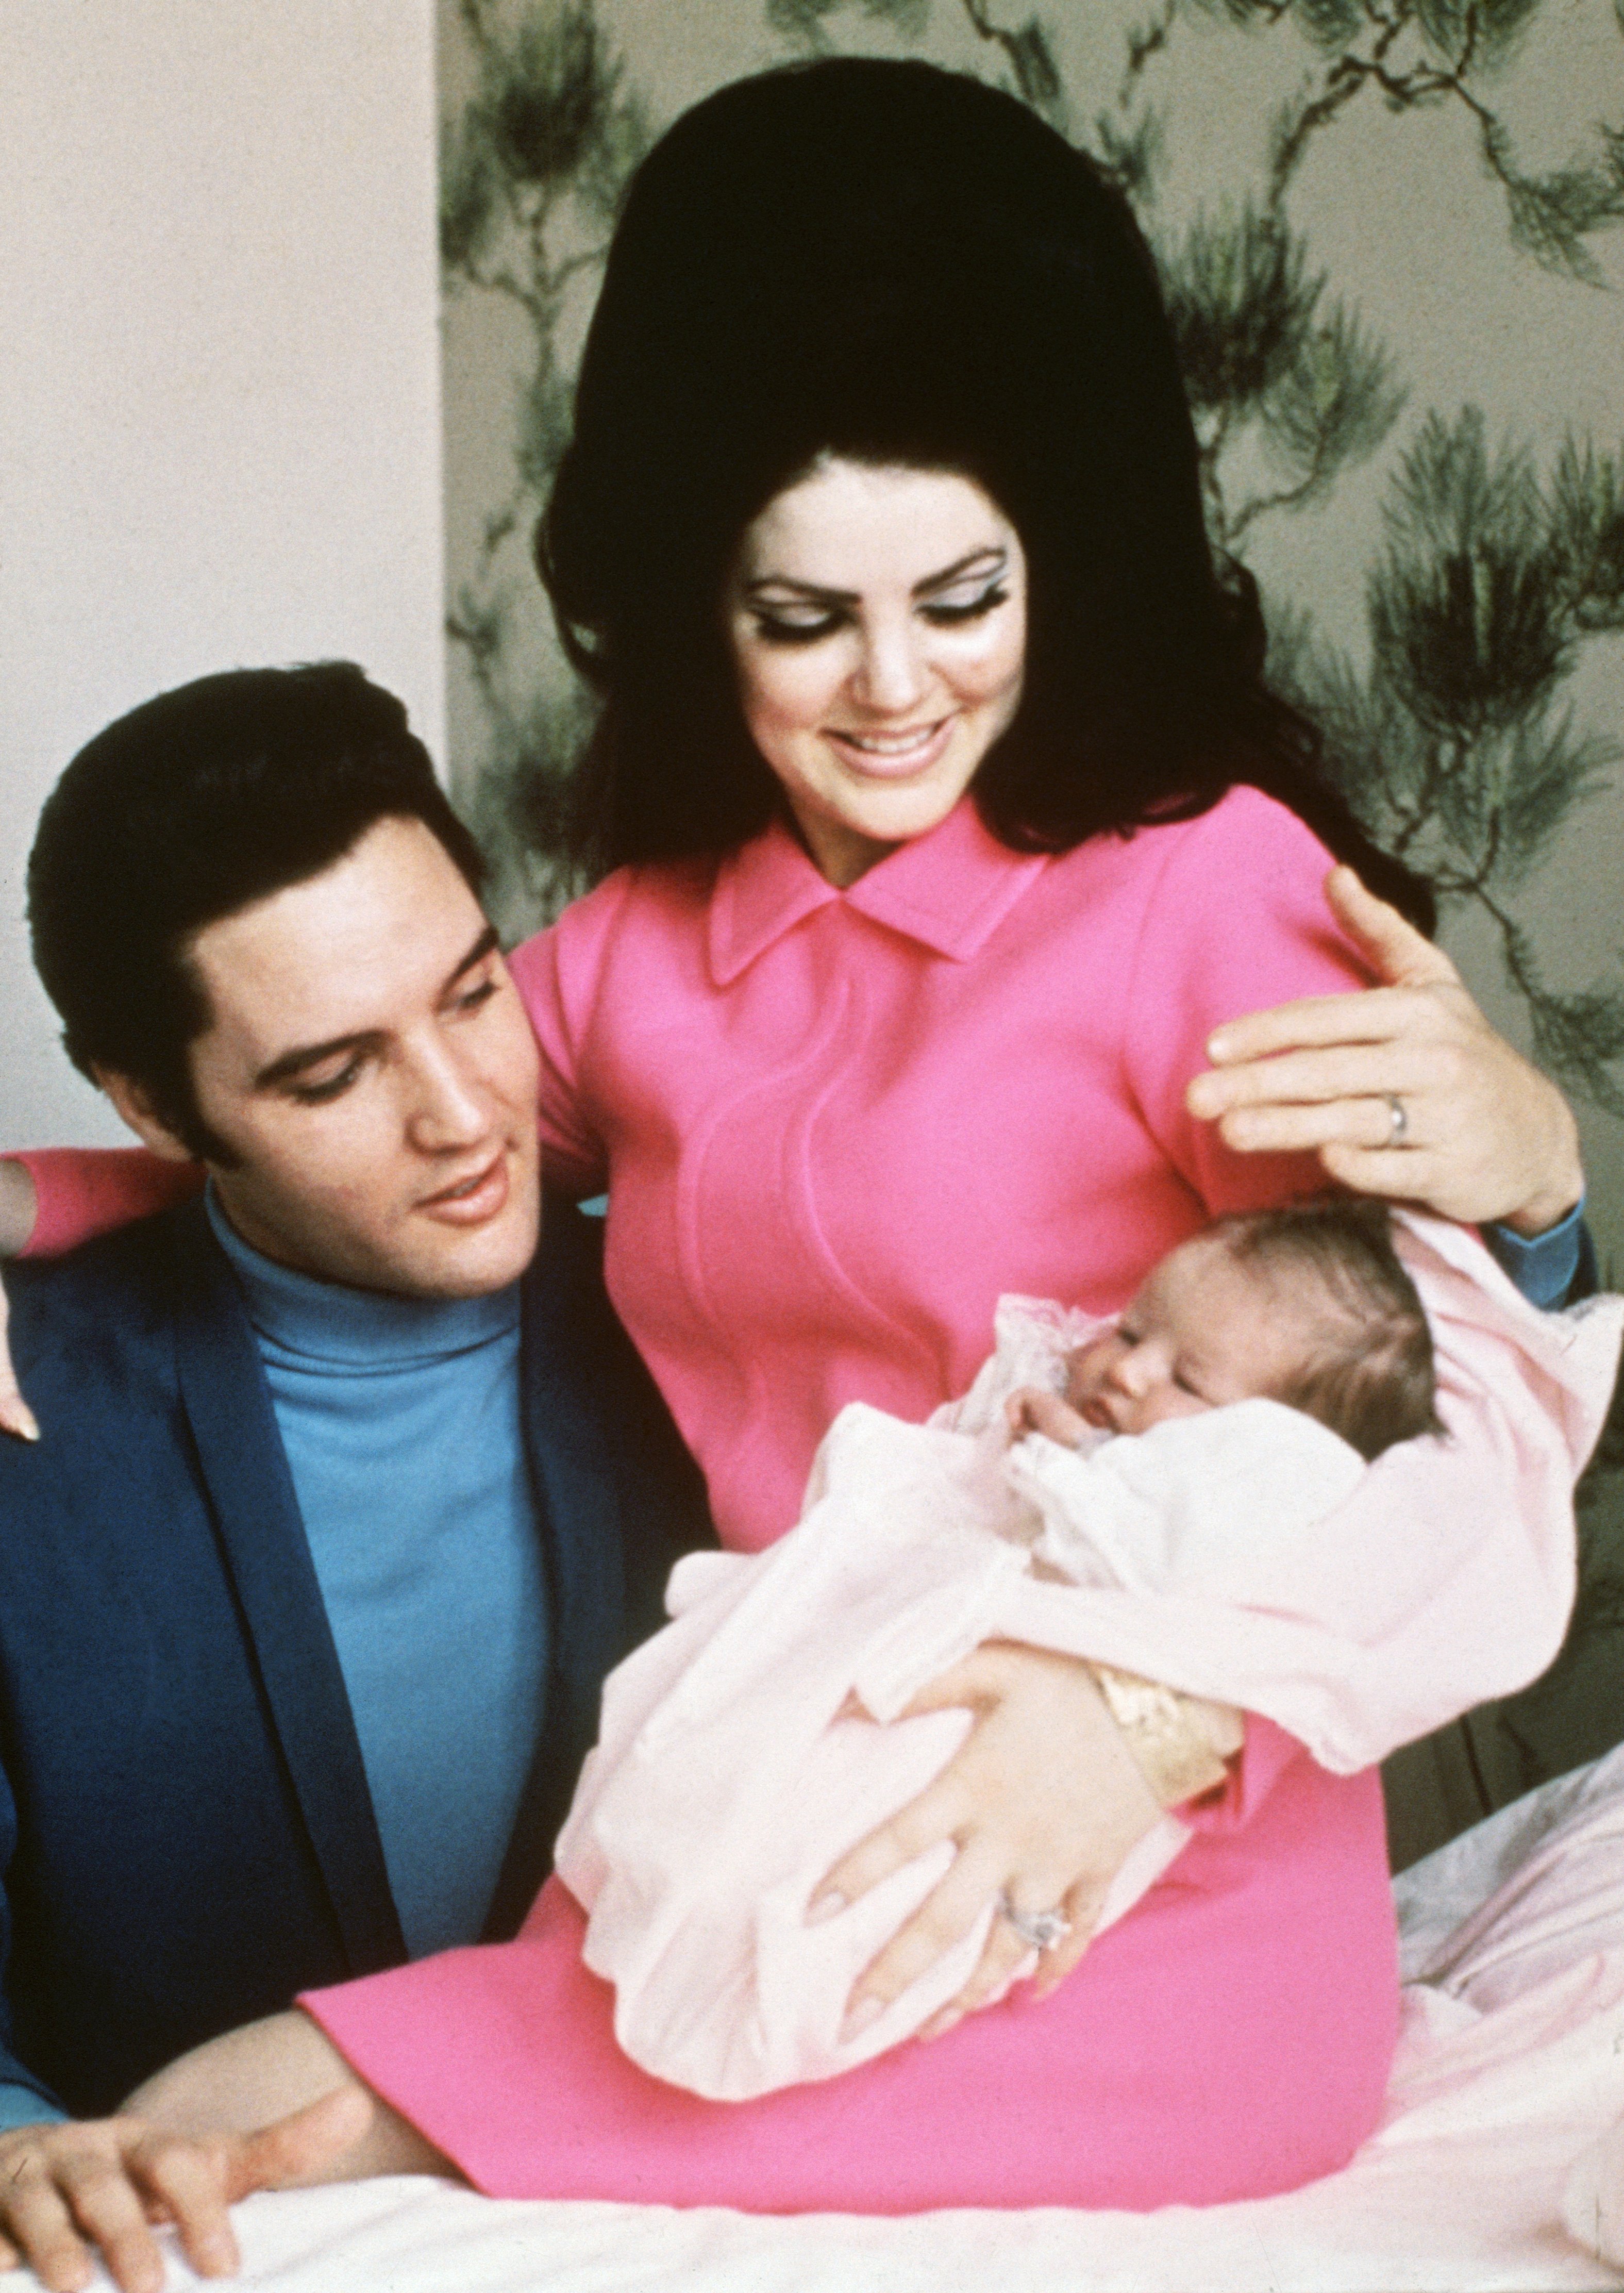 Elvis Presley and his wife, Priscilla, prepare to leave the hospital with their new daughter, Lisa Marie. Memphis, Tennessee, February 5, 1968. | Source: Getty Images